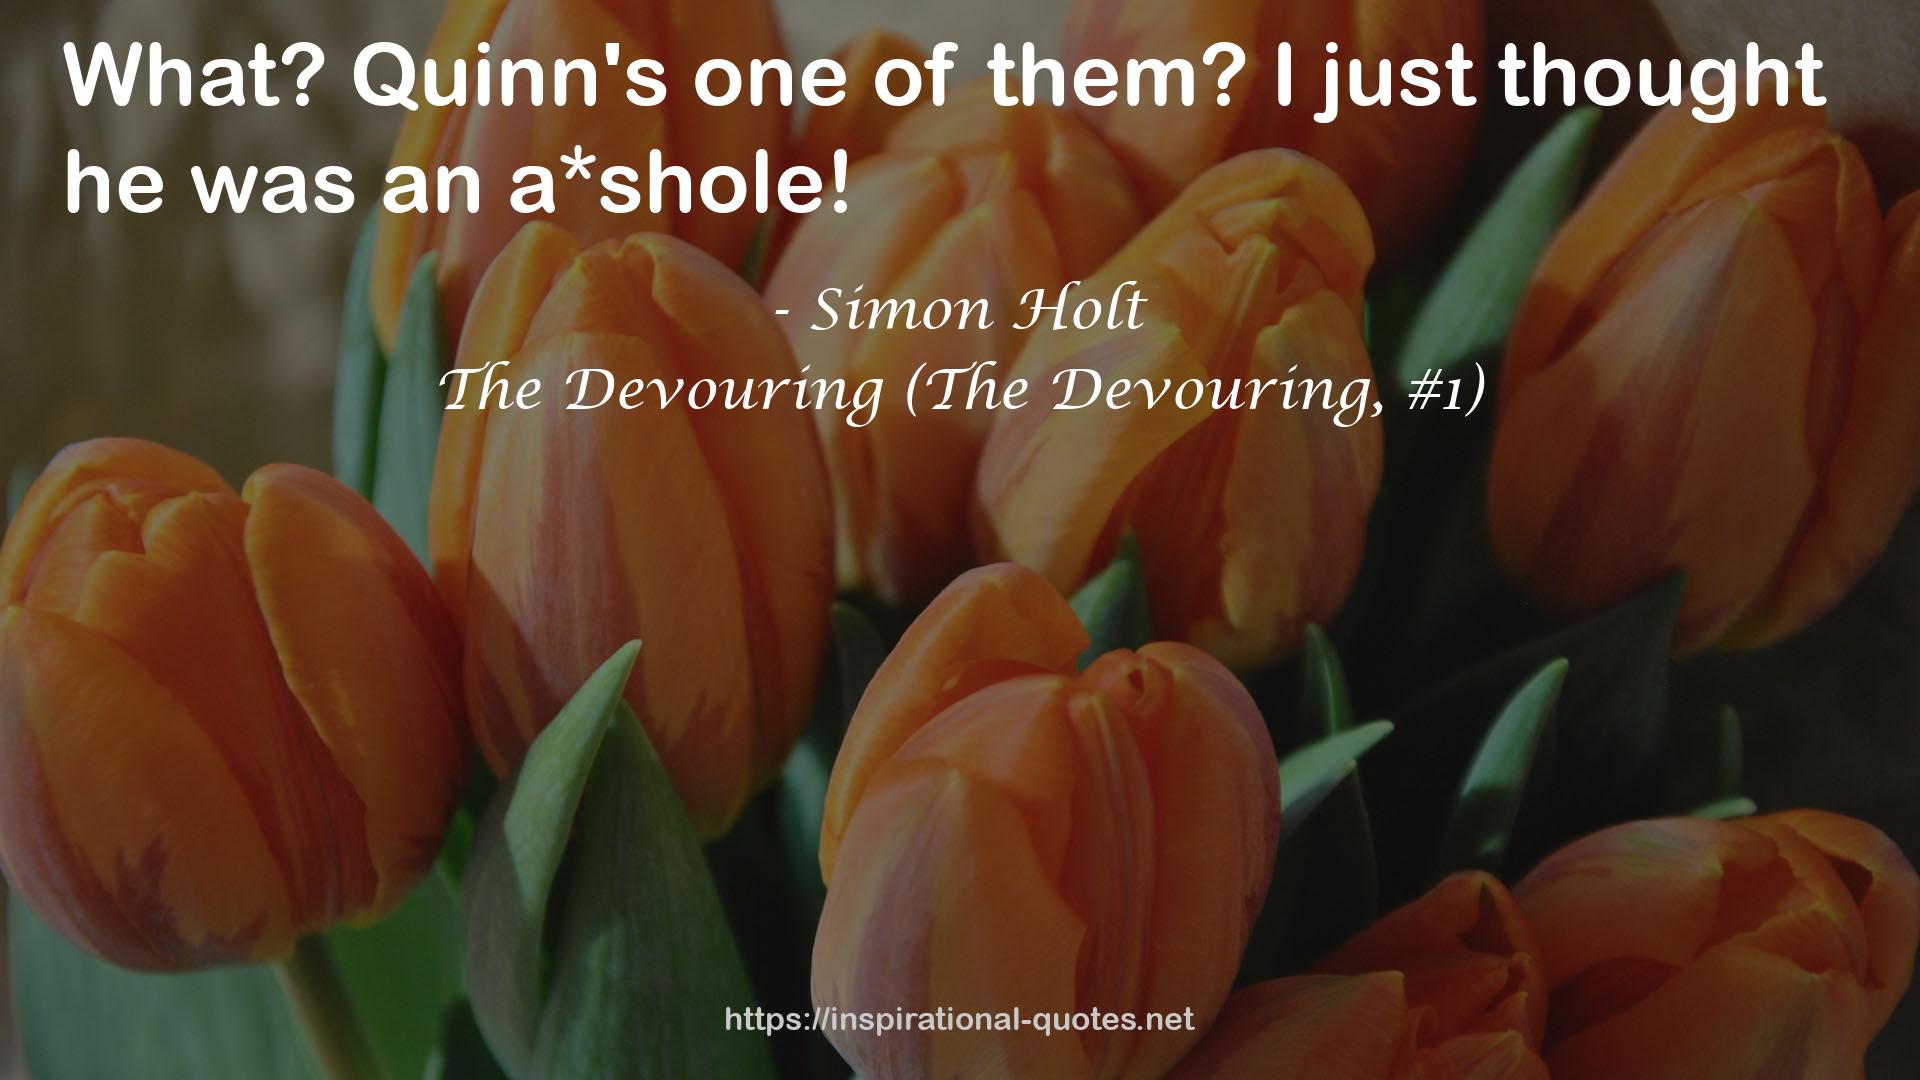 The Devouring (The Devouring, #1) QUOTES